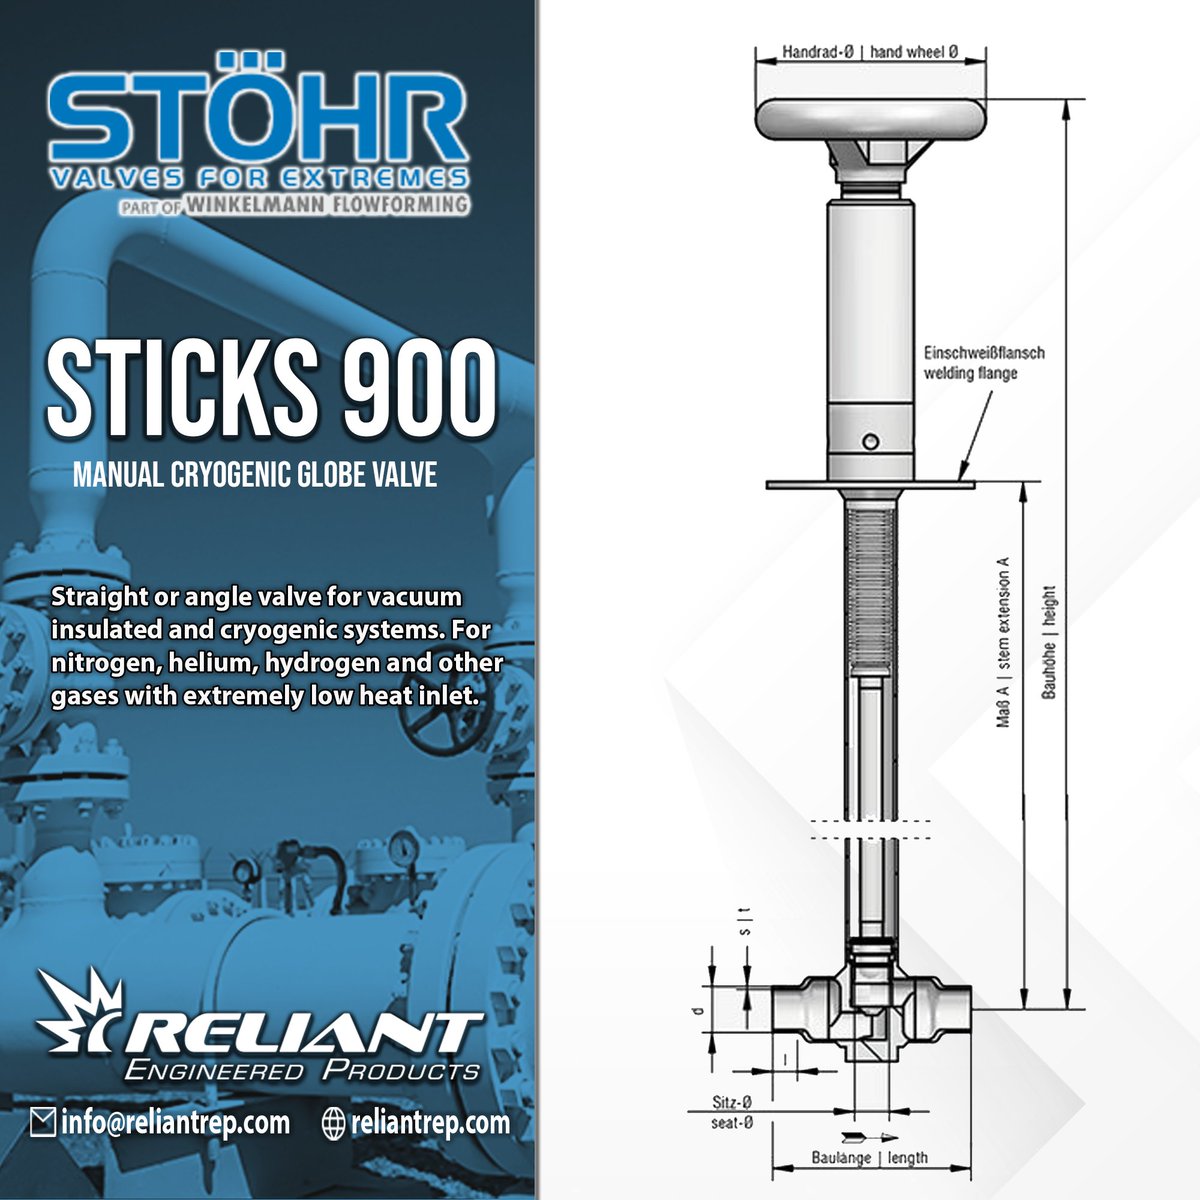 STOHR ARMATUREN offers manual cryogenic globe control valves for reliable low-temperature applications. #StohrArmaturen #CryogenicGlobeValve #ManualCryogenicValve #LowTemperature #ValveSolutions #ReliablePerformance